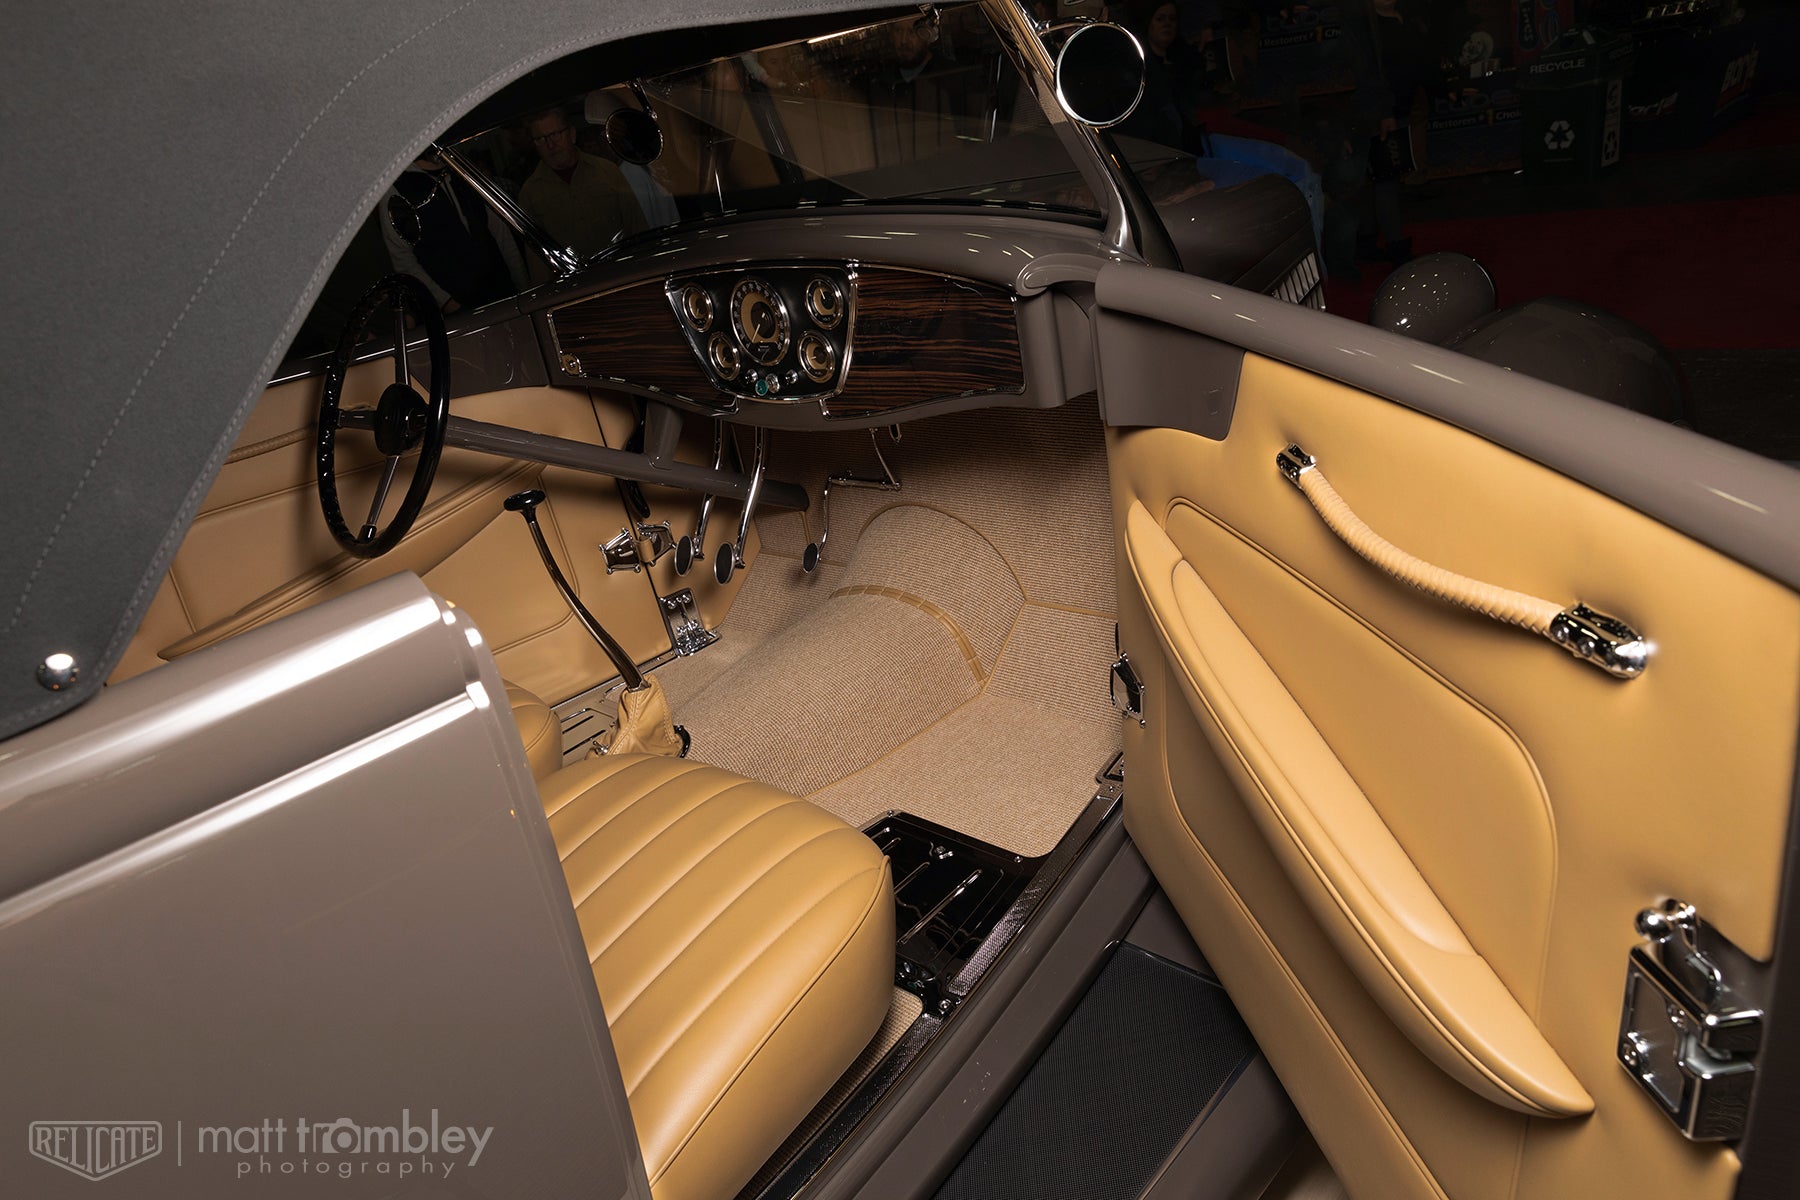 Relicate Leather Interior 1936 Ford "3 Penny Roadster" - George Poteet- 2019 AMBR Winner